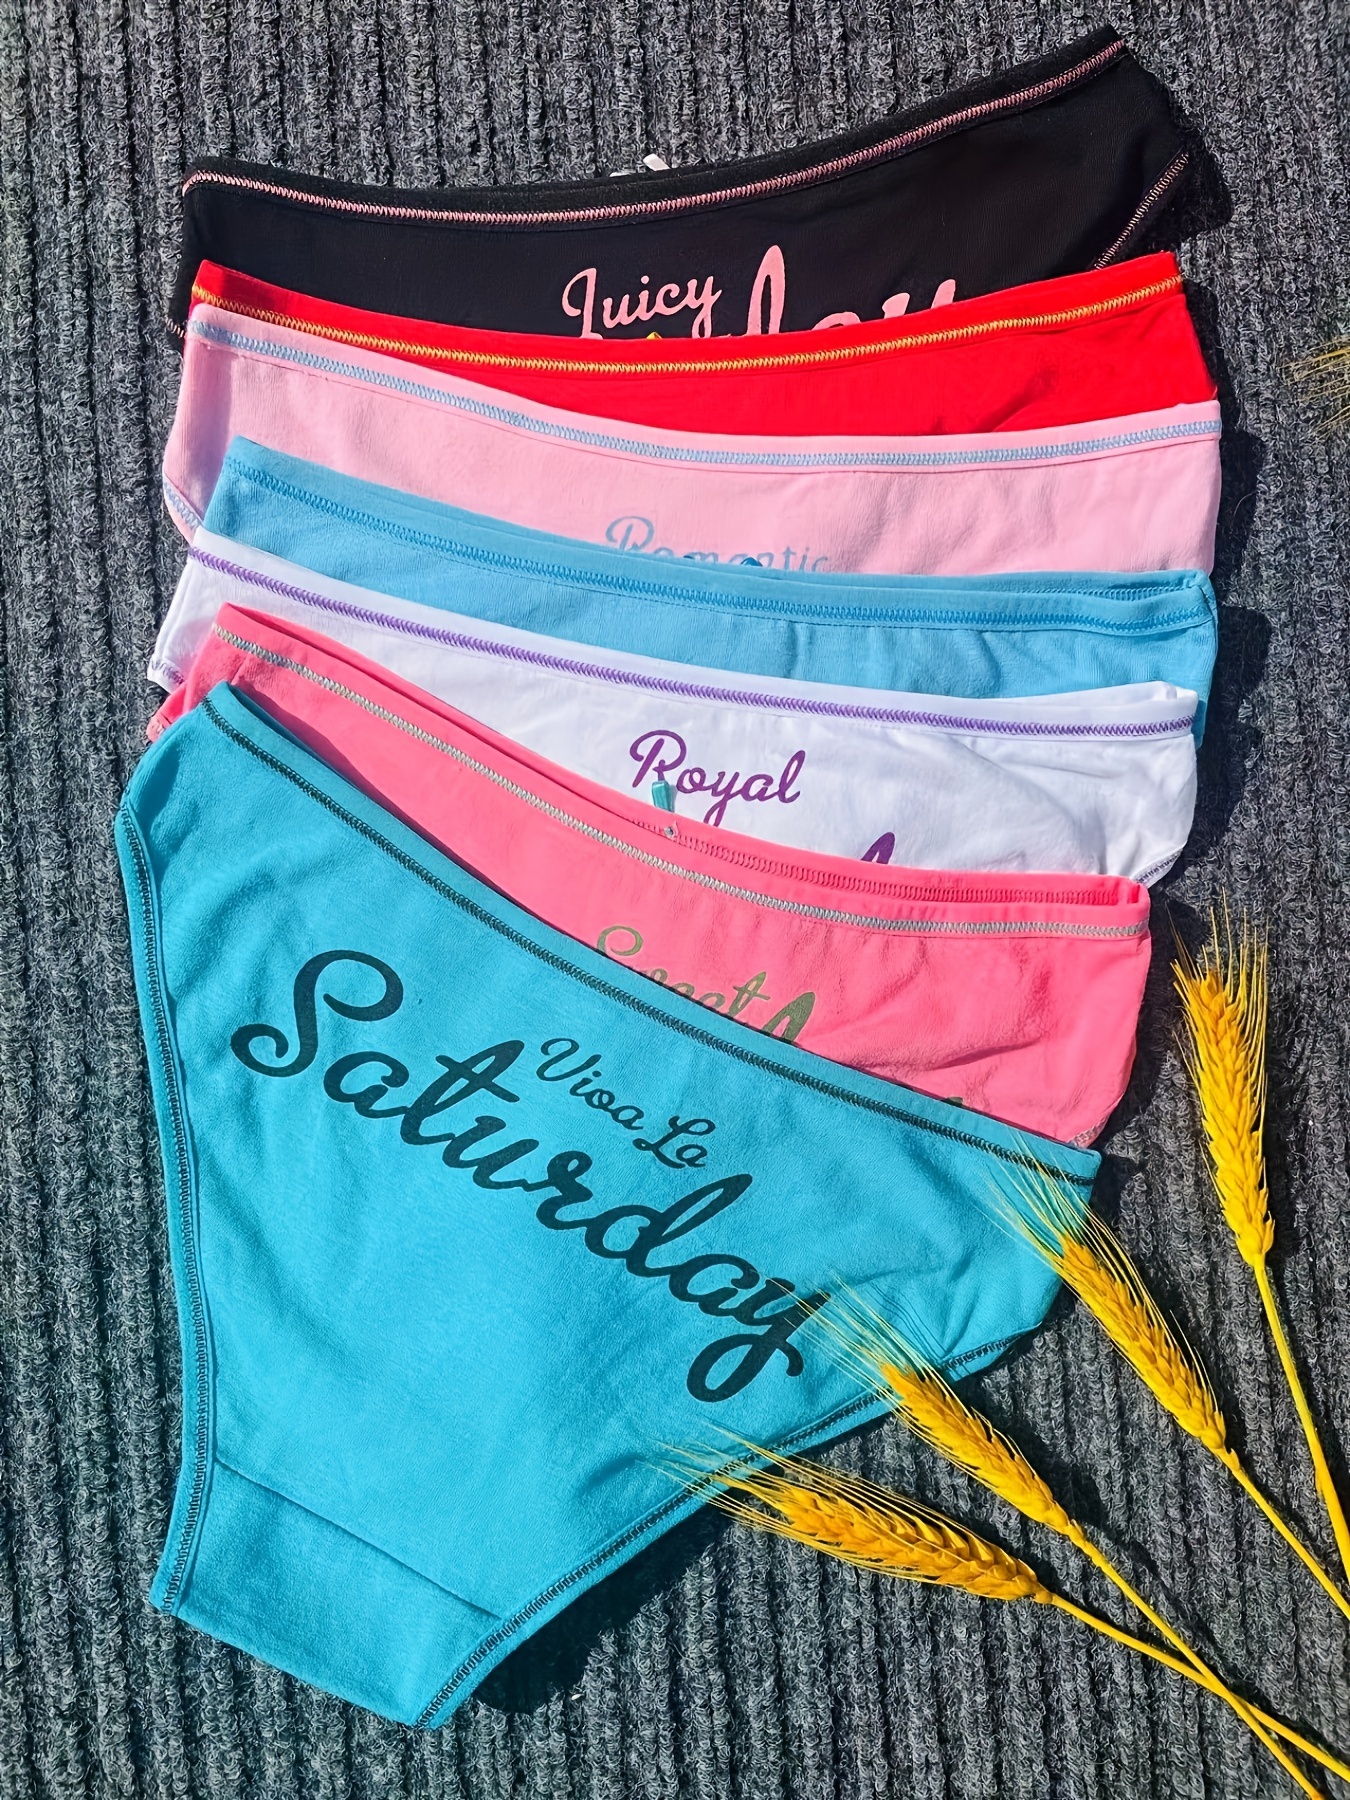 Juicy Couture Low Rise Panties for Women